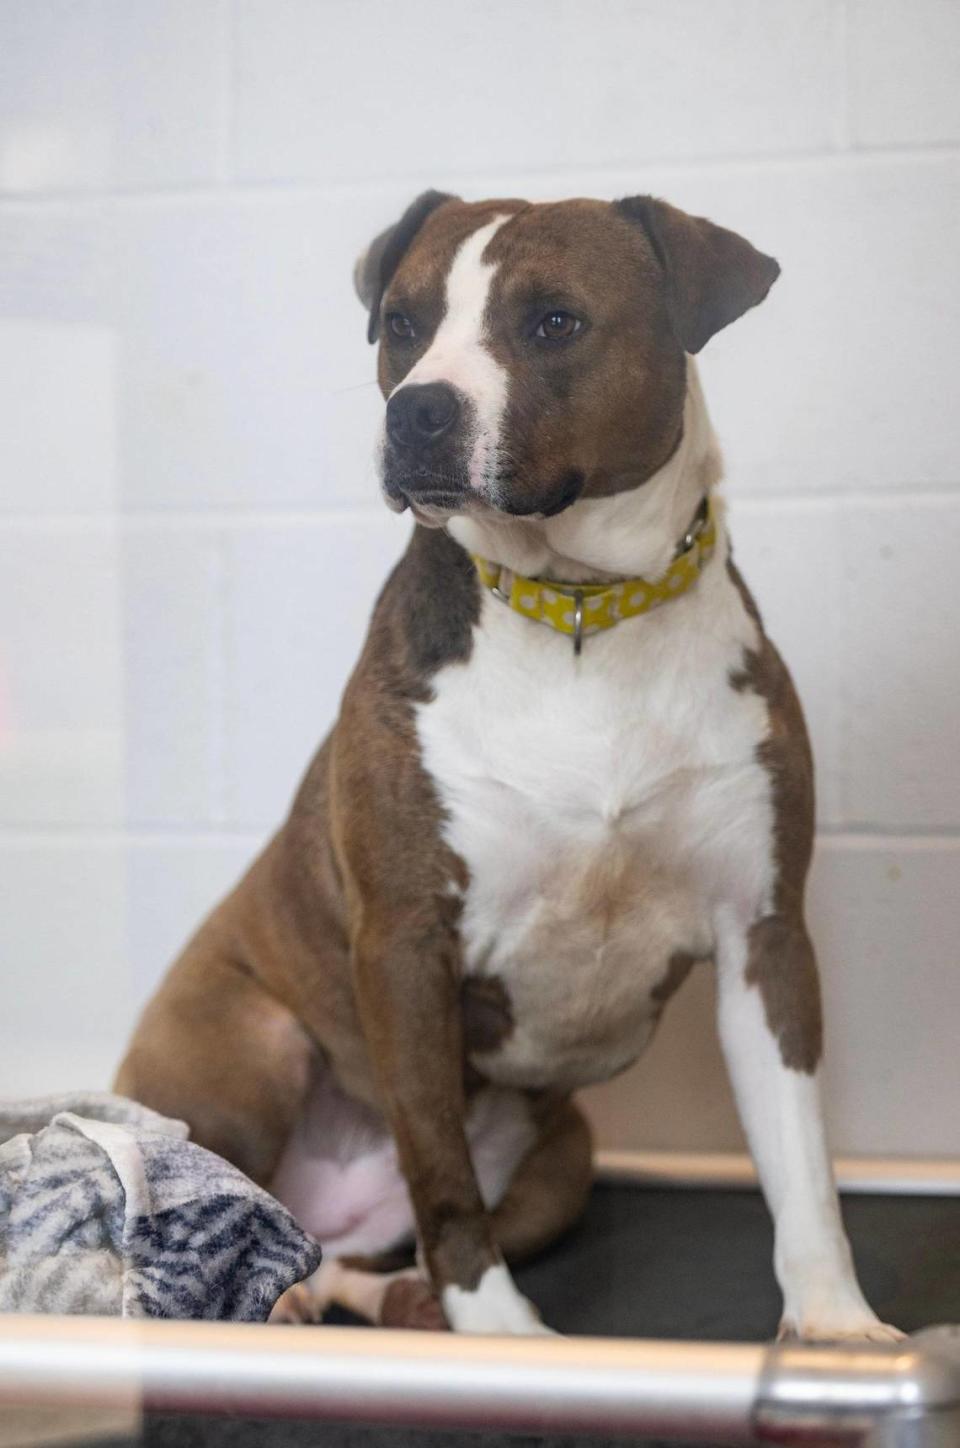 Alfred, a 2-year-old pit bull mix, was sheltered at KC Pet Project for nearly five months before being taken into foster care and is still awaiting a permanent home. Dogs are placed on the kennel’s “at risk” list for euthanasia after 30 days.